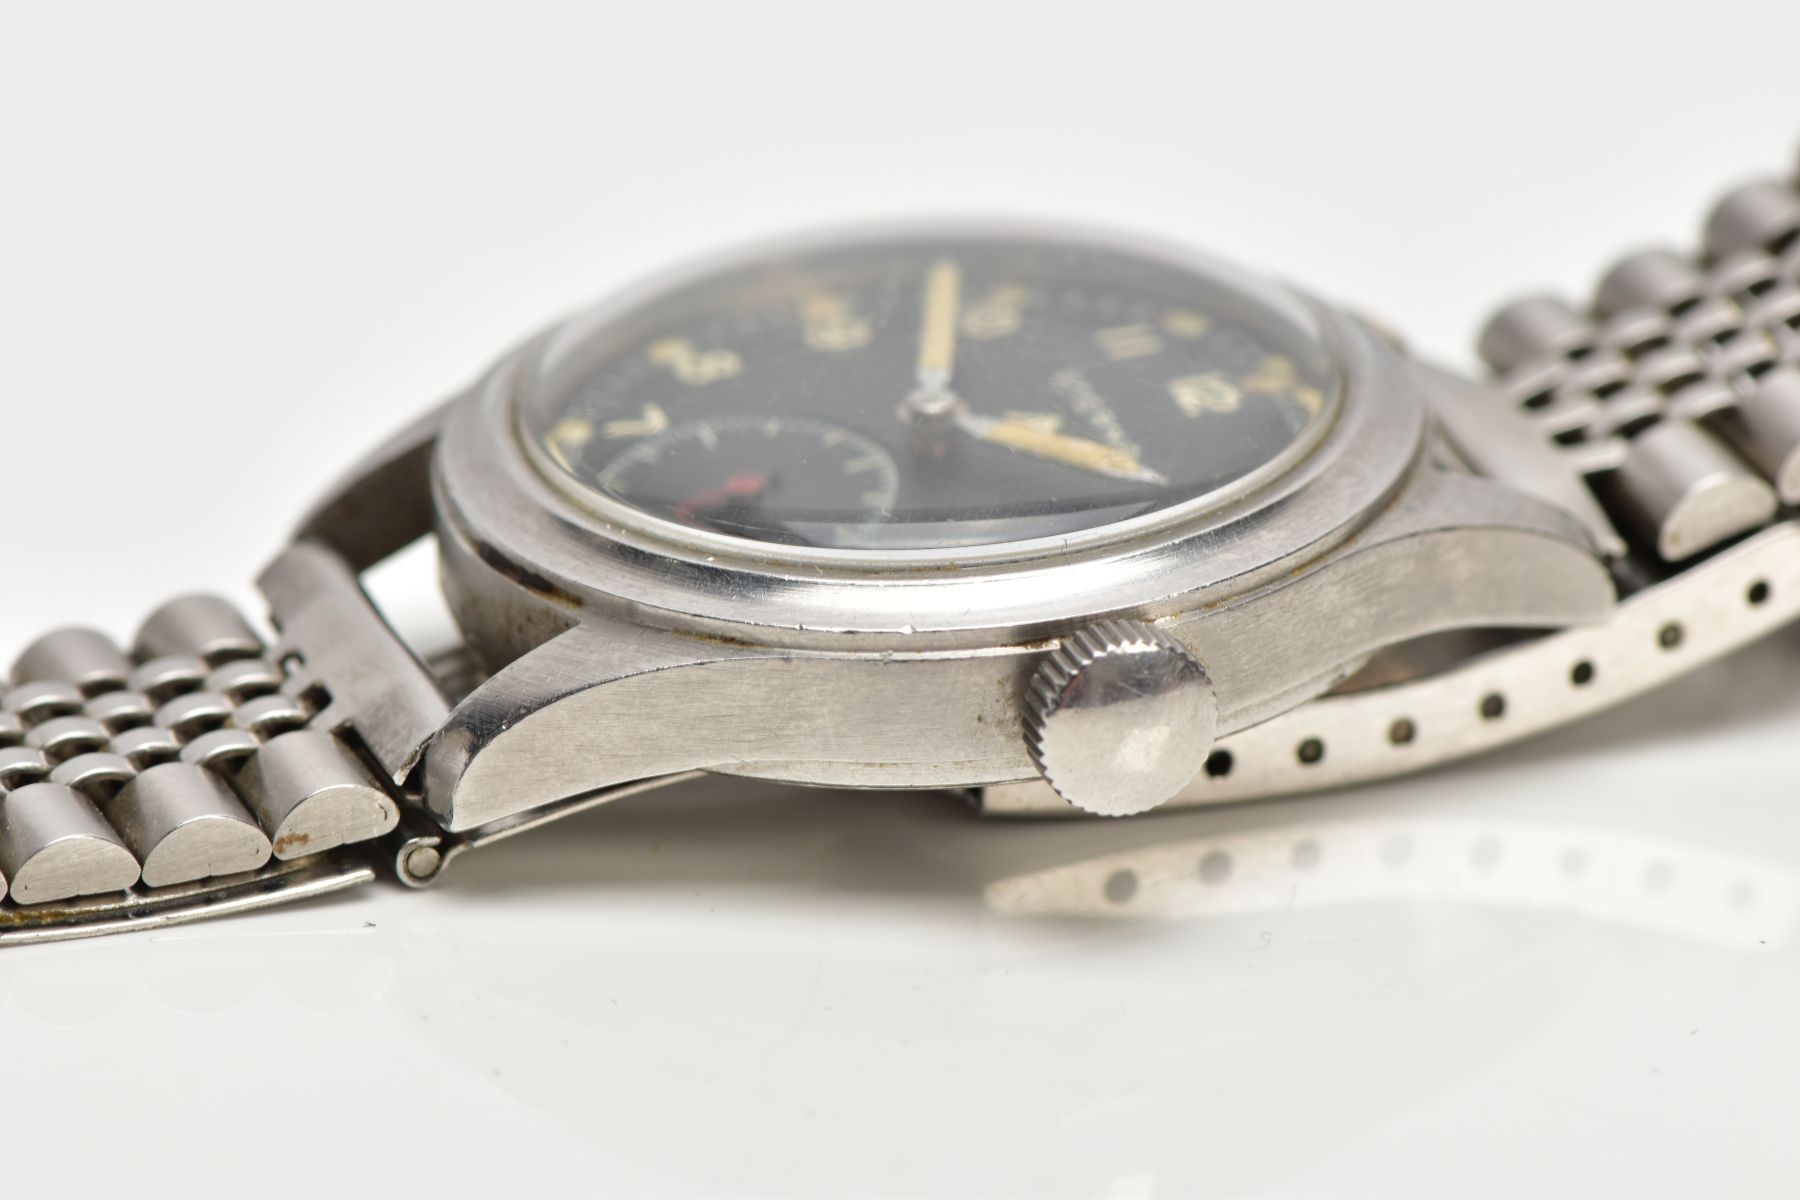 AN ETERNA STAINLESS STEEL BRITISH MILITARY ISSUE GENTLEMANS WRISTWATCH, CASE BACK MARKED WITH - Image 5 of 6